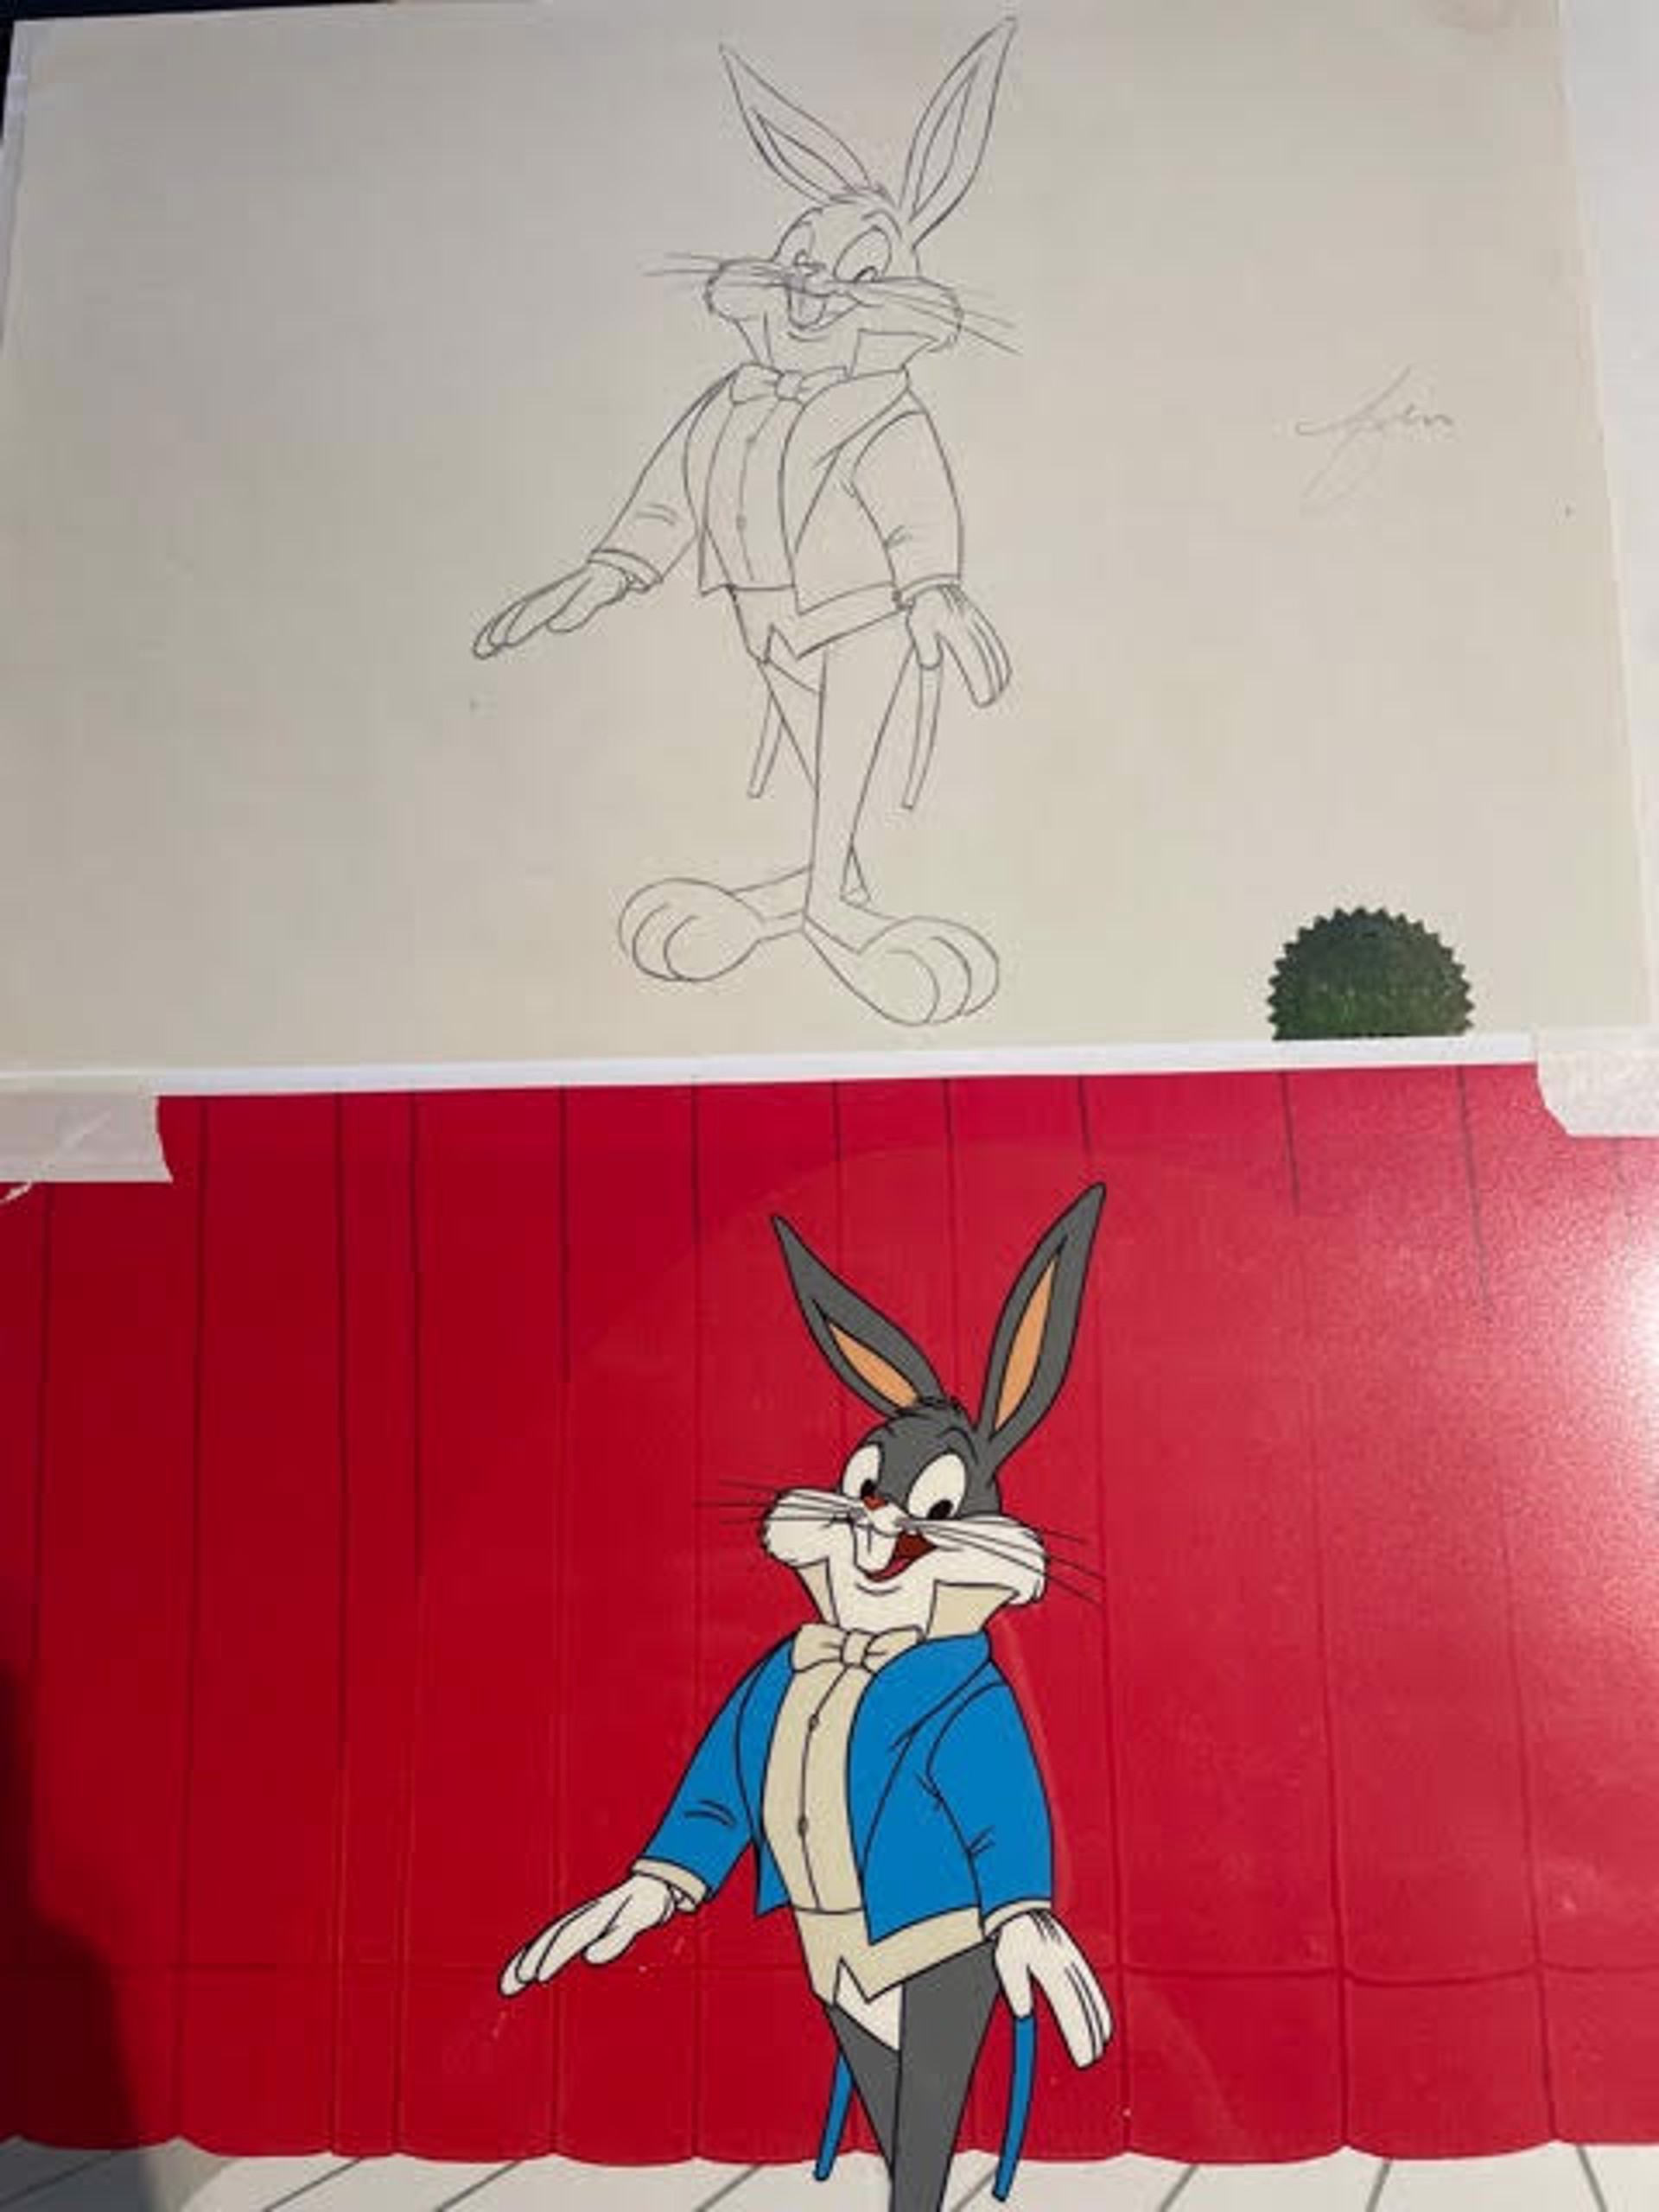 Carnival of the Animals - Sketch and Serigraph Cel, unframed by Chuck Jones